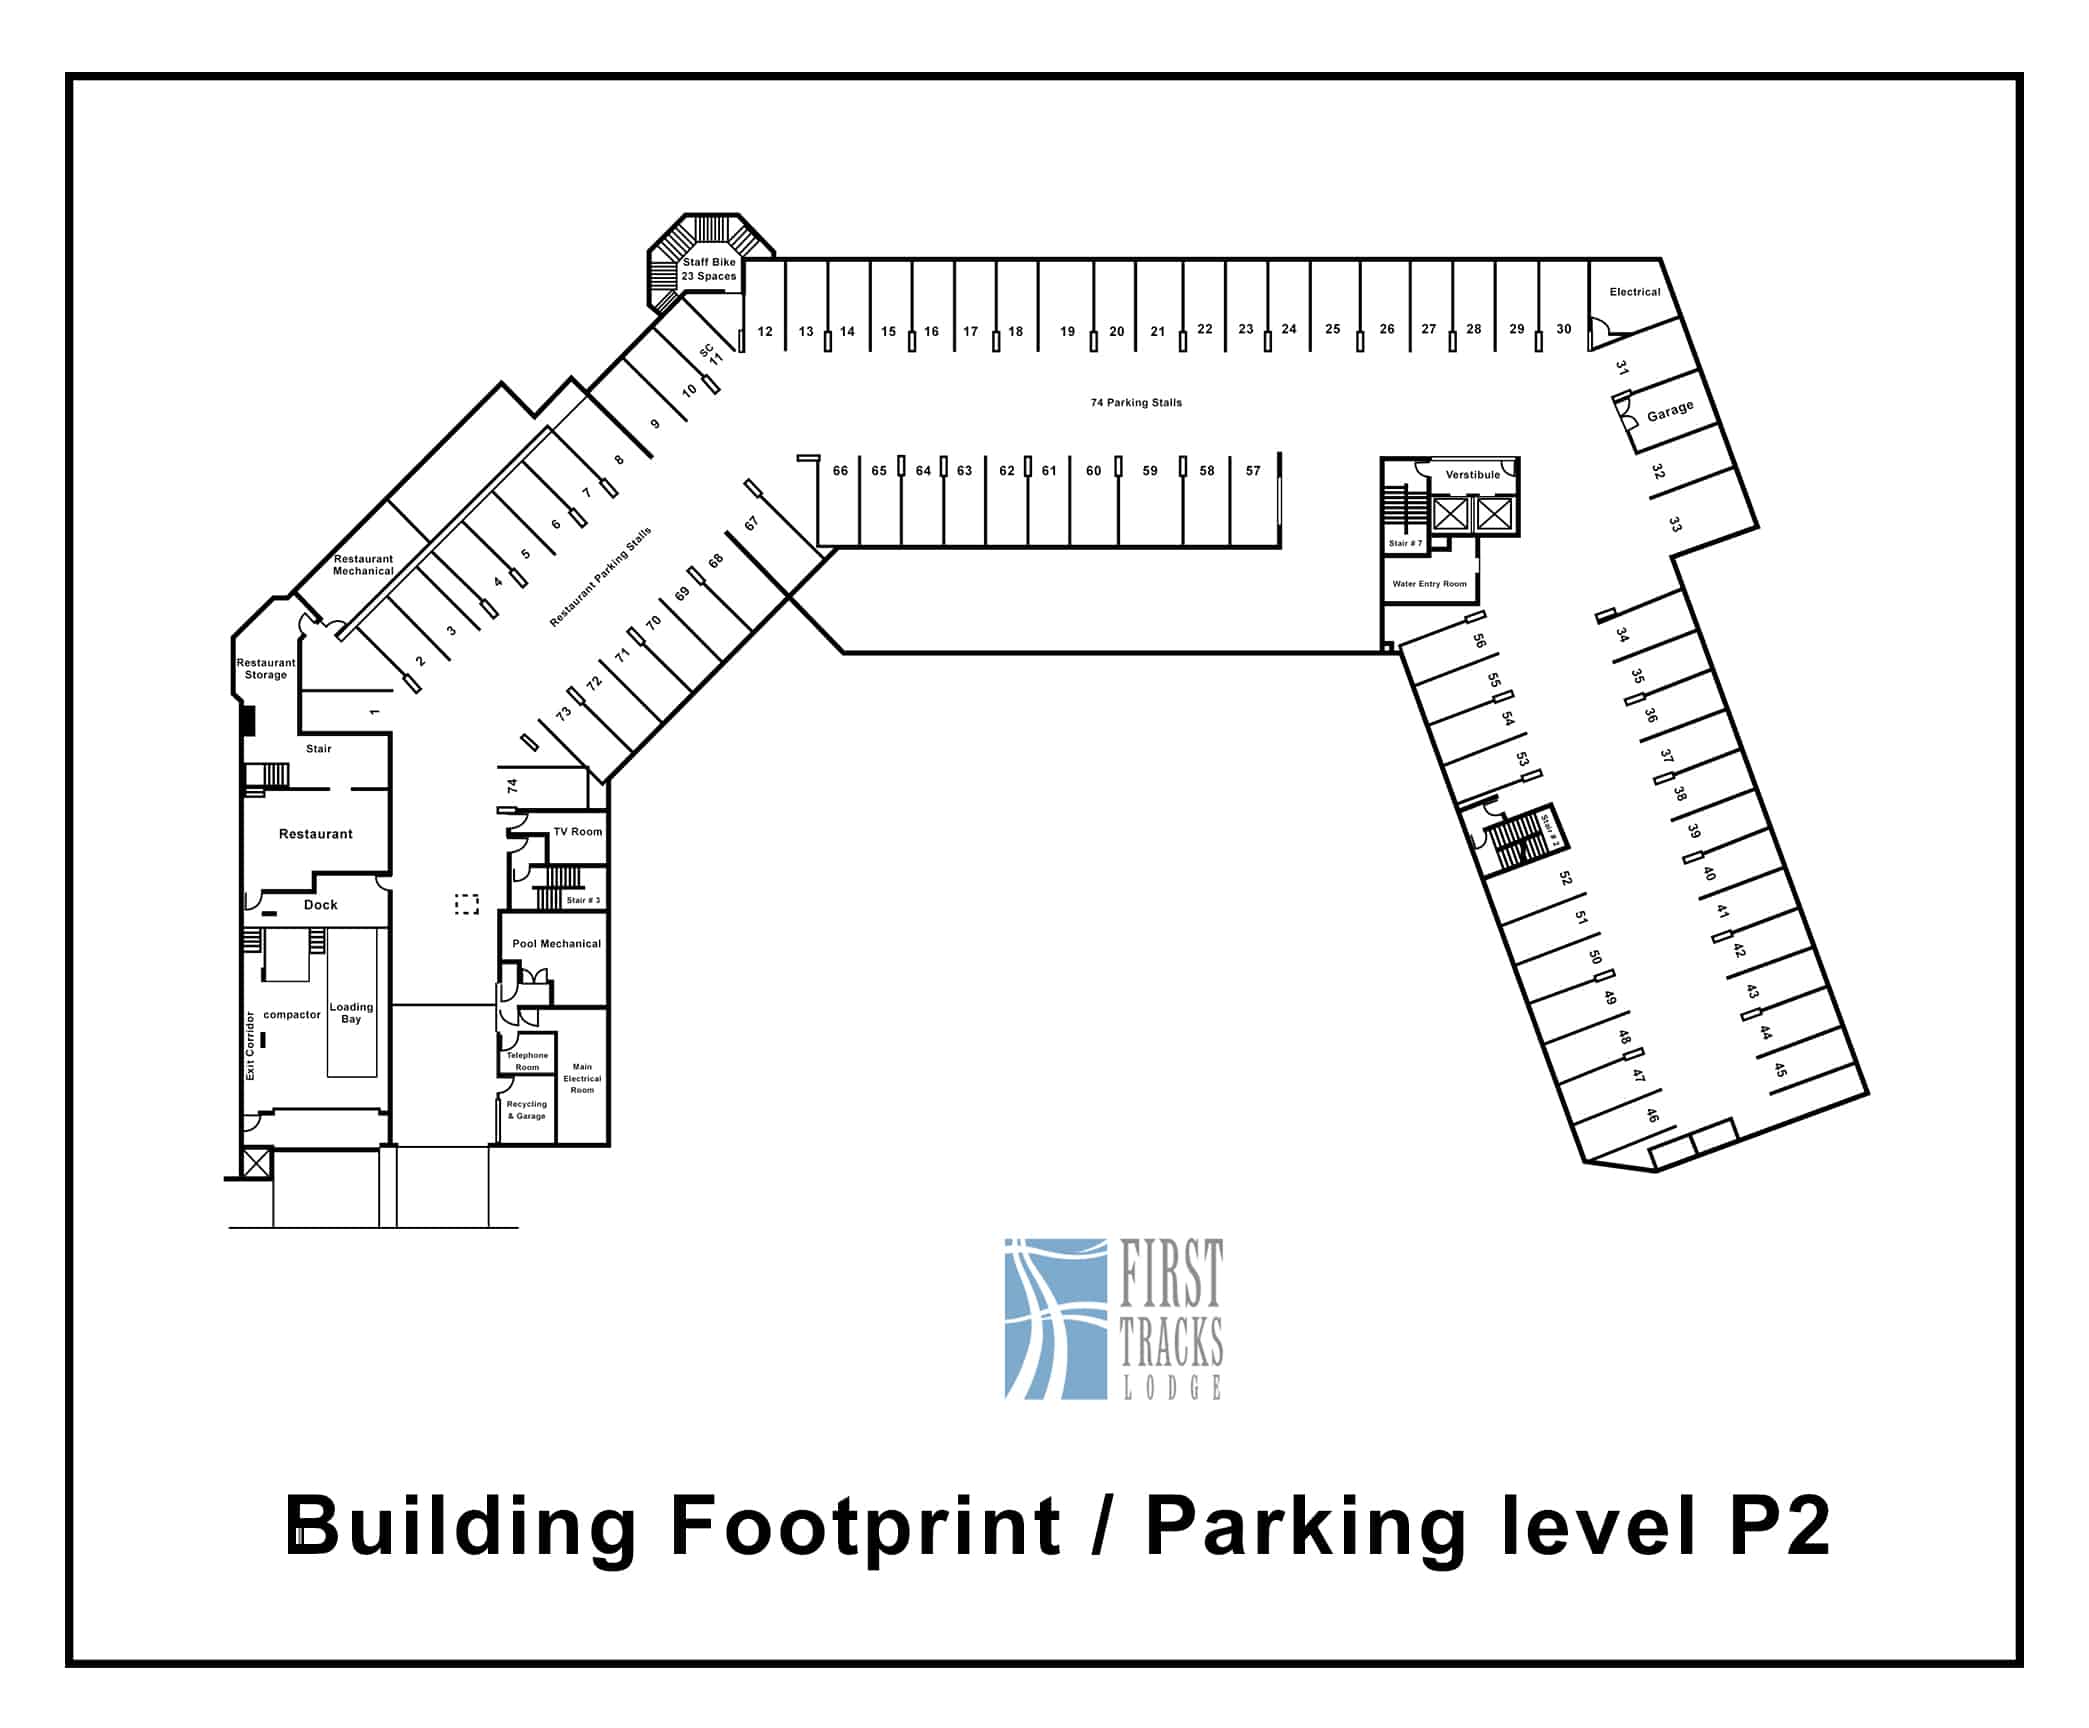 Parking-Level-P2-First-Tracks-Lodge-Building--